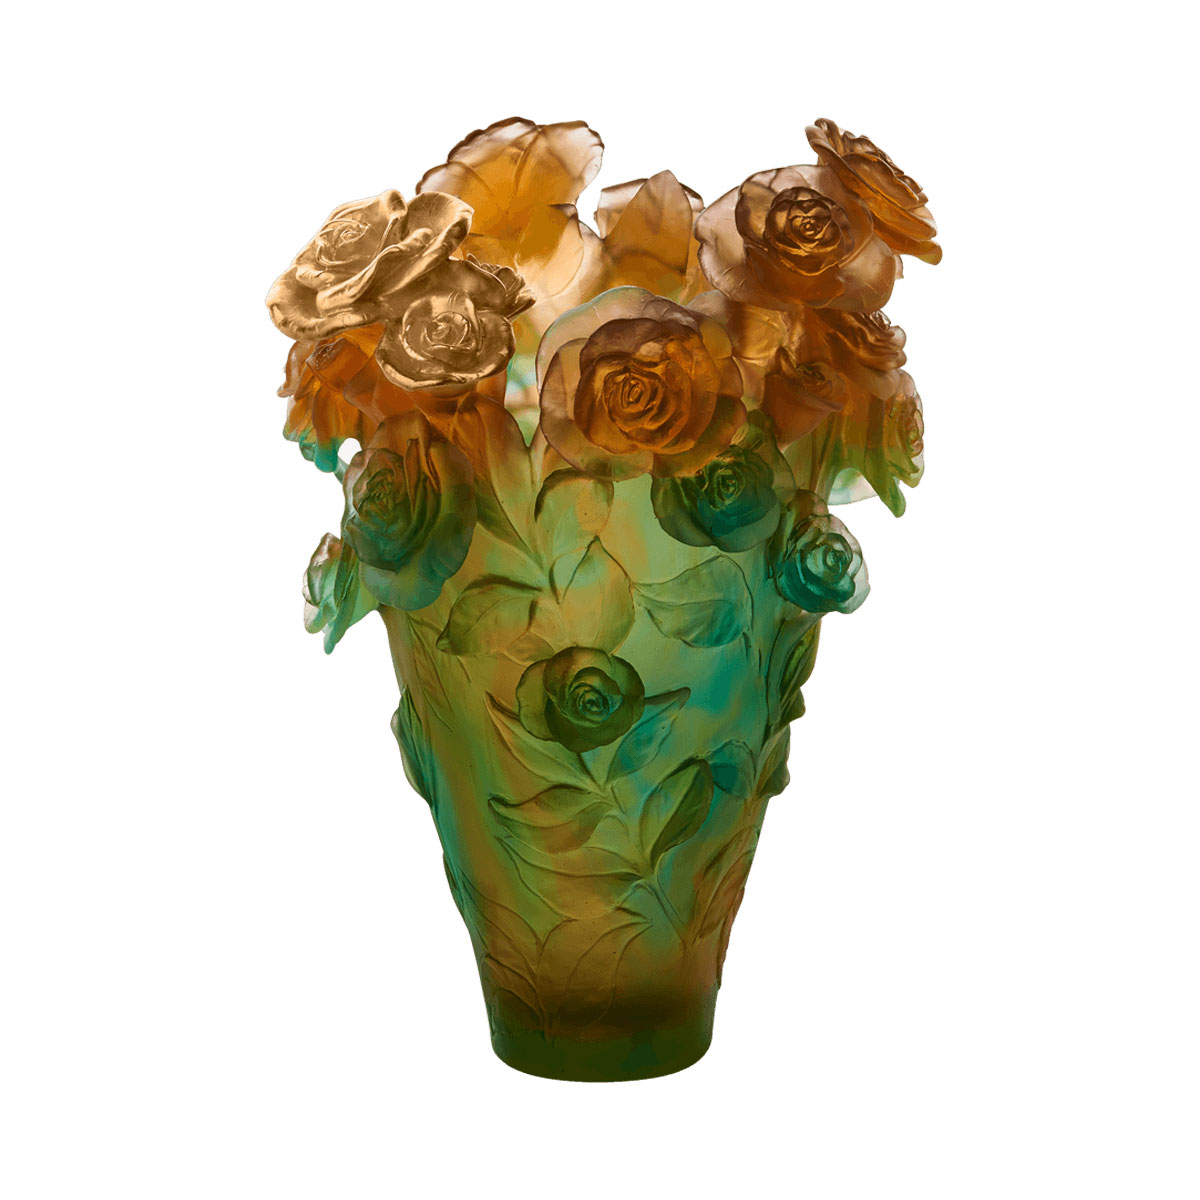 Daum Magnum Rose Passion Vase in Green and Orange with Gilded Rose, Limited Edition